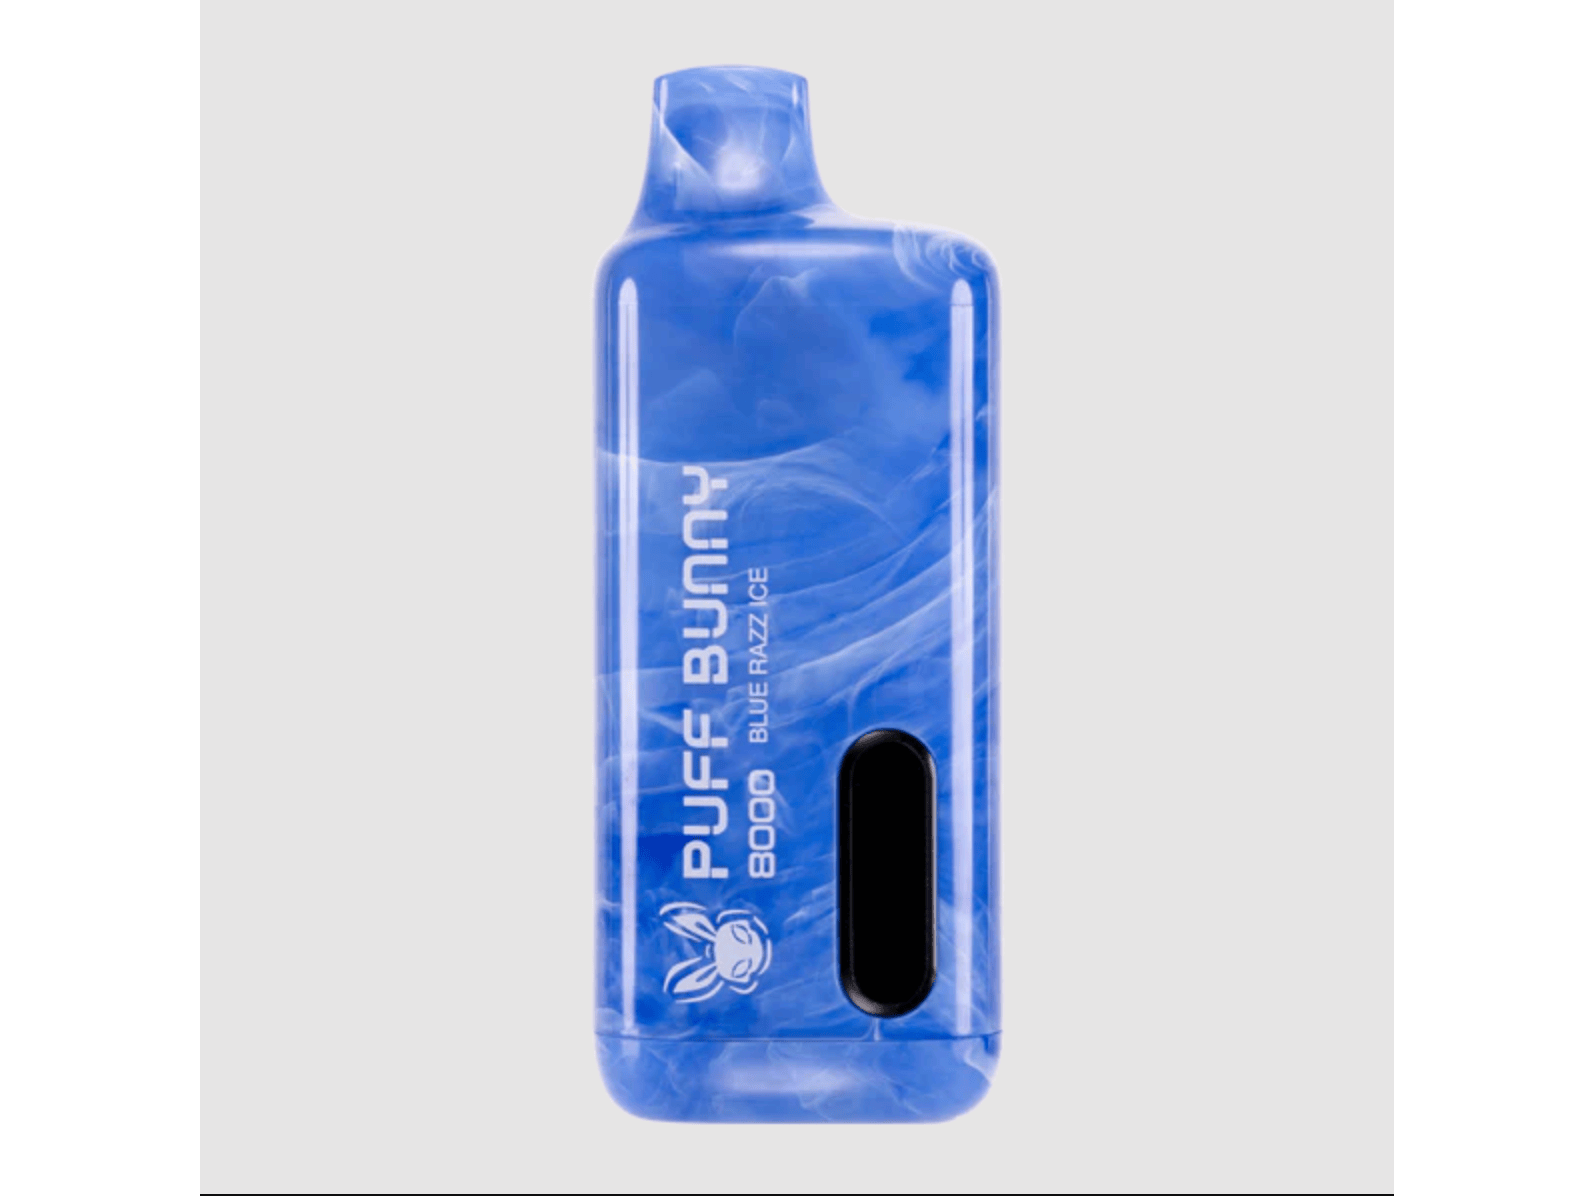 Puff Bunny Blue Razz Ice flavored disposable vape device.